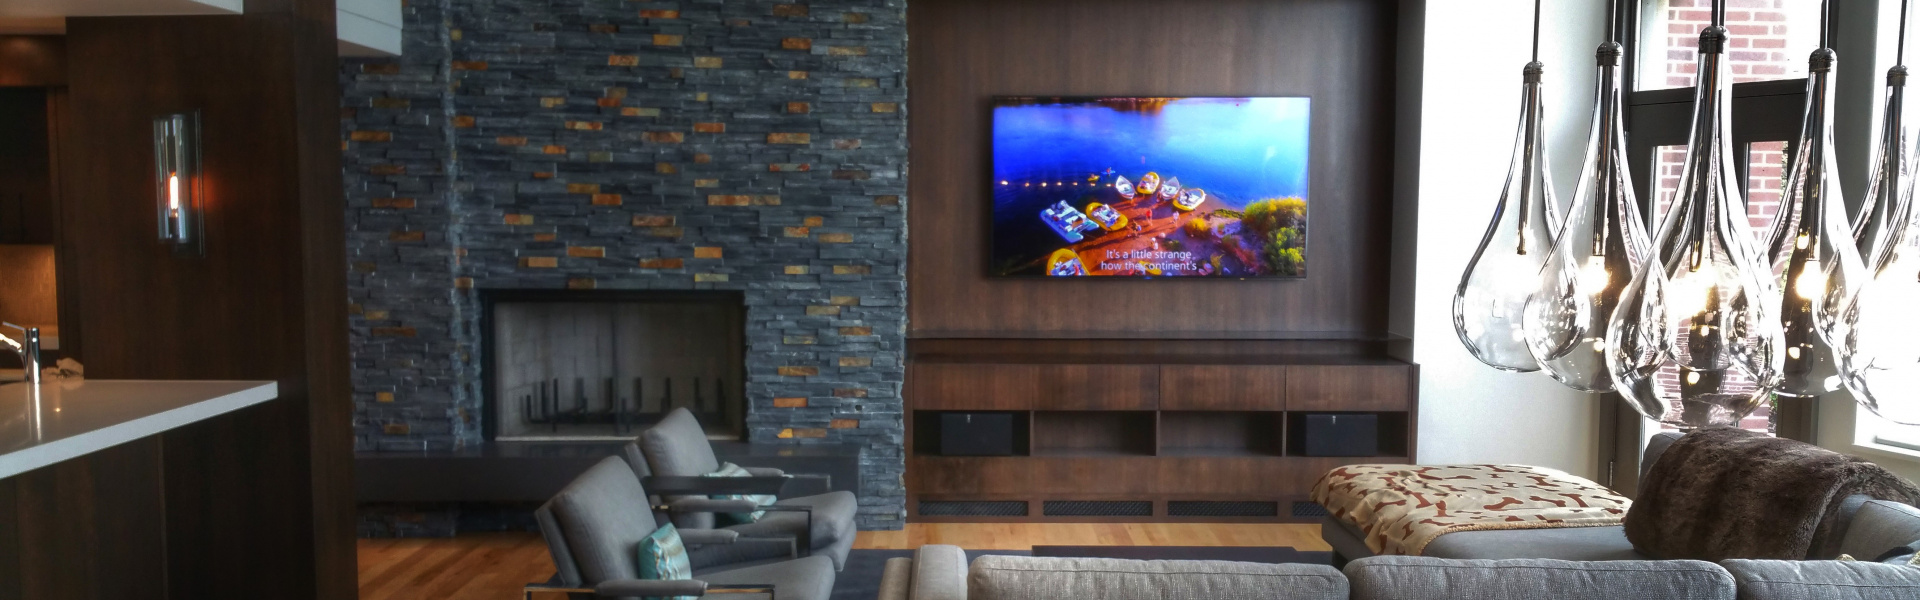 Smart home installation by AudioWorks for Kamas